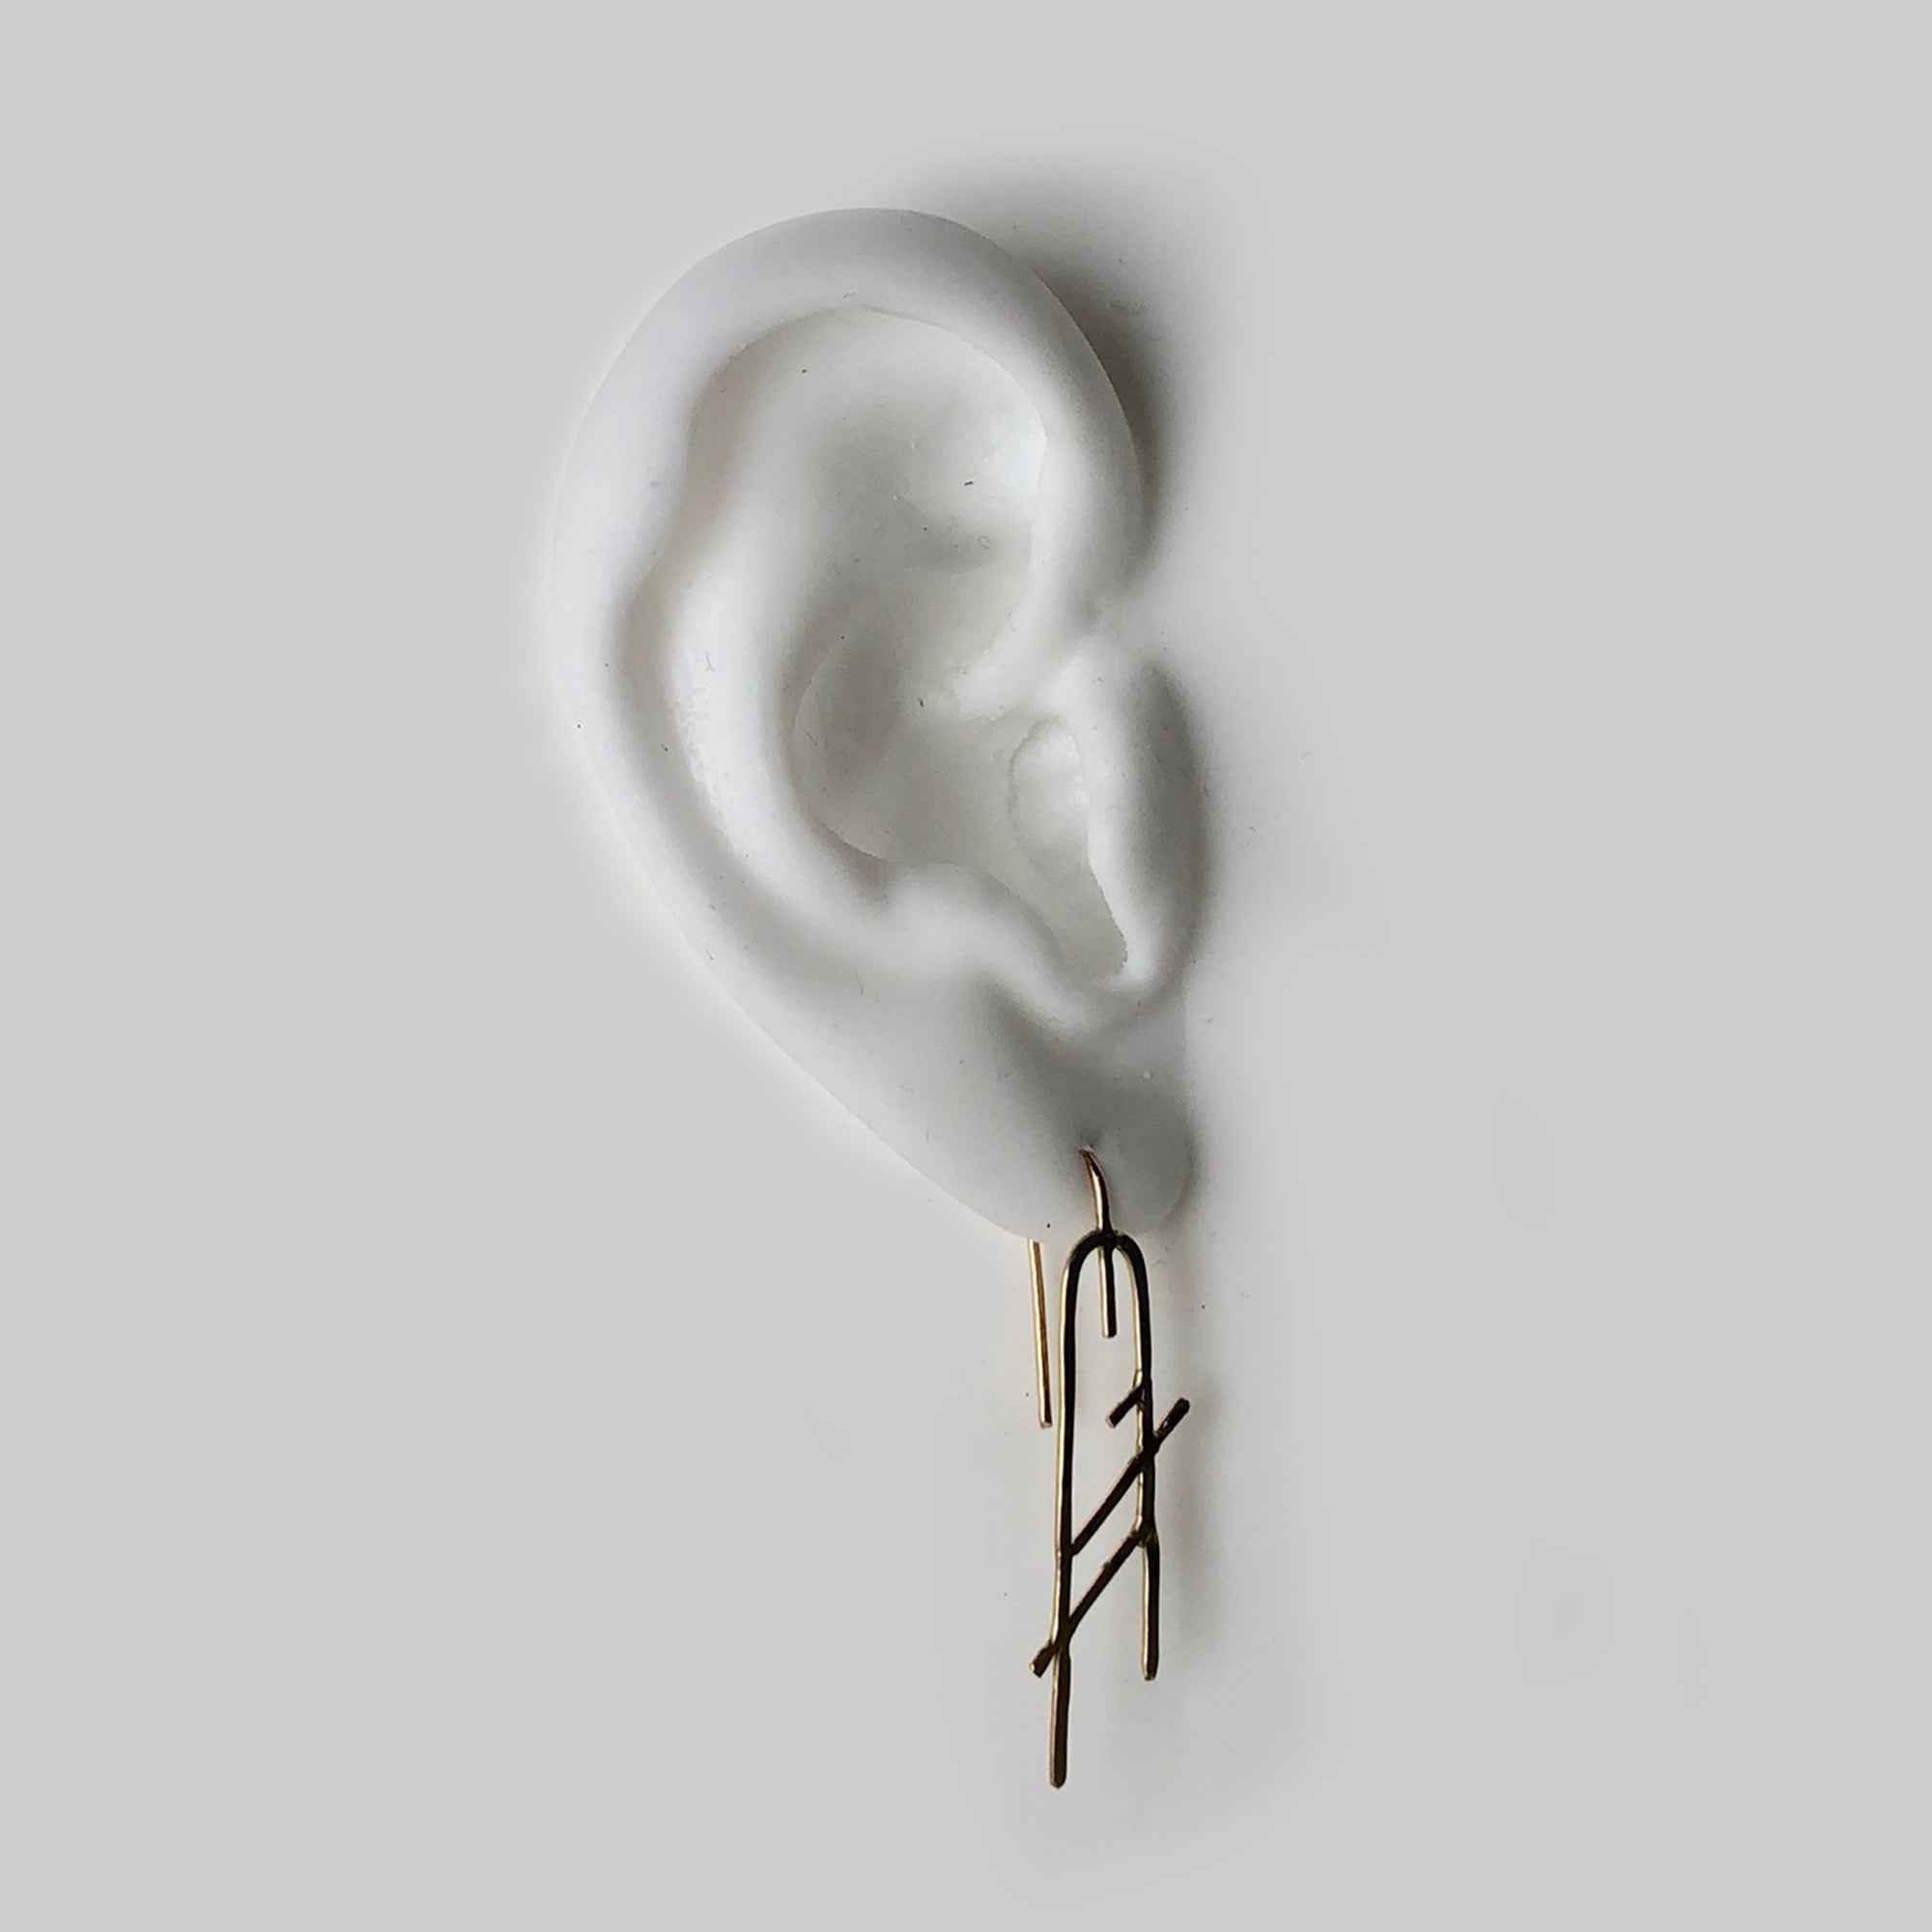 Moab Hook Earrings in 14k gold, these delicate one-of-a-kind earrings are from our collaboration with Callen Thompson 